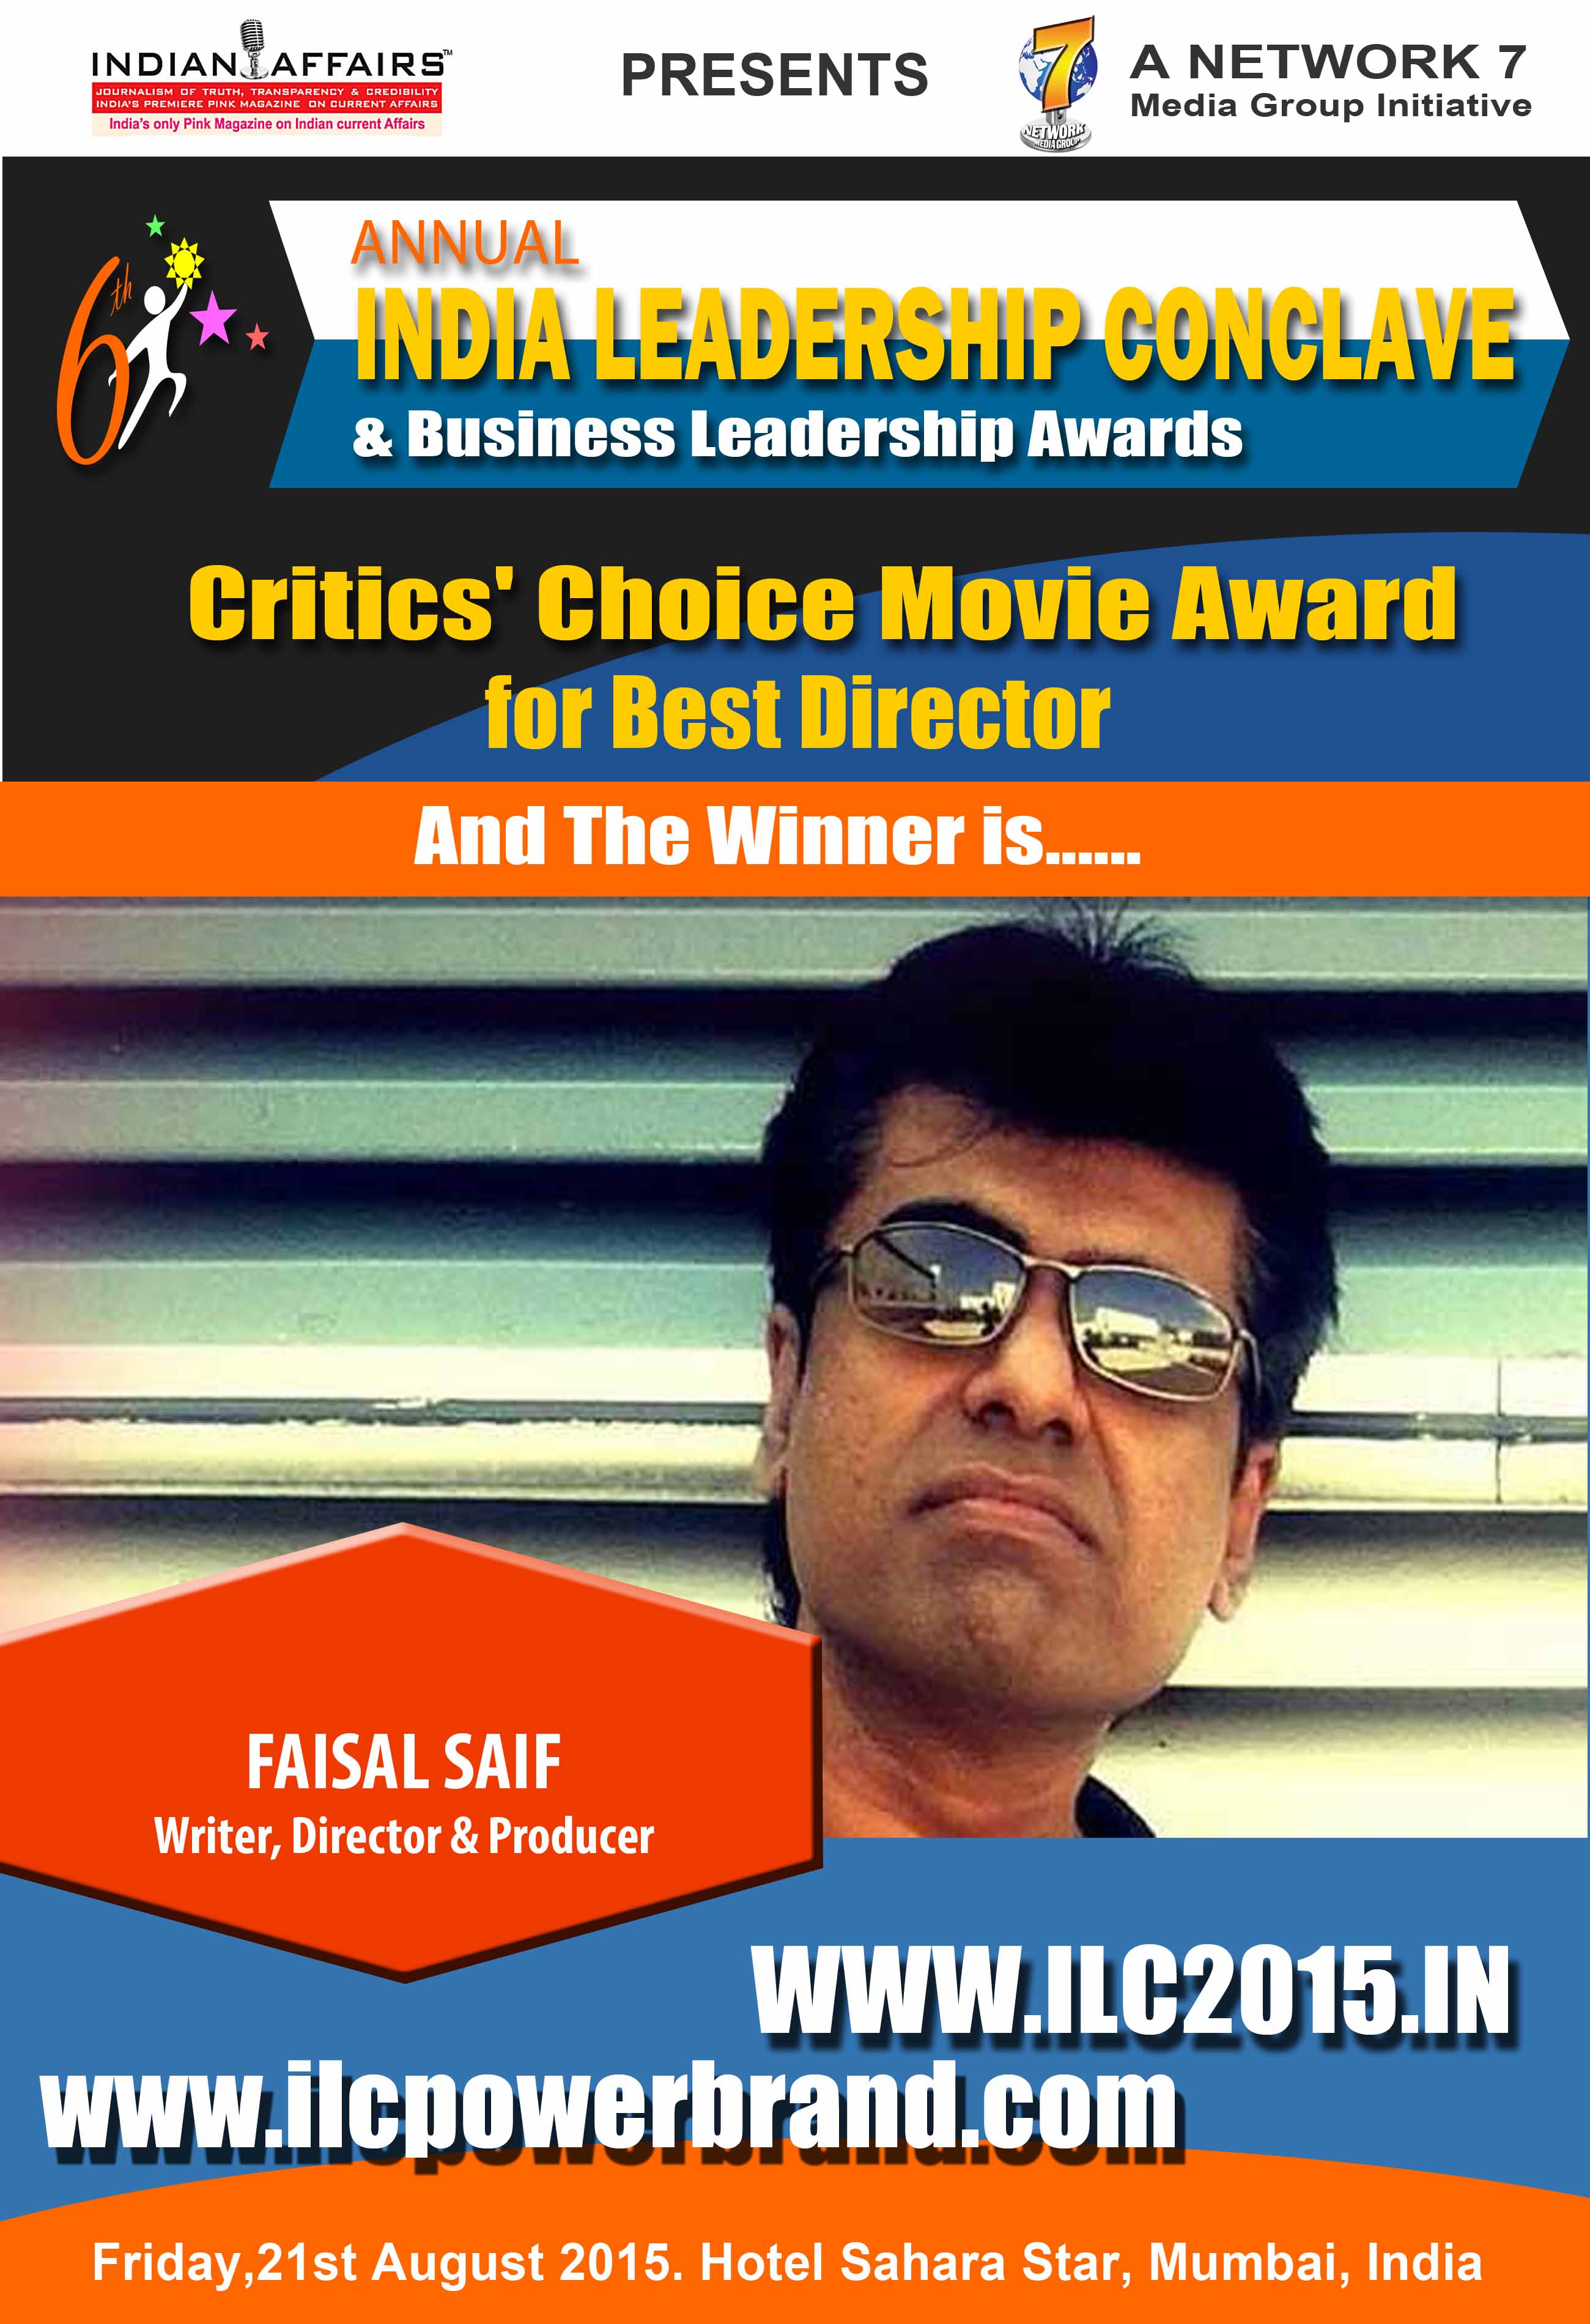 Network 7 Media Group Jury to felicitate noted Filmmaker Faisal Saif at